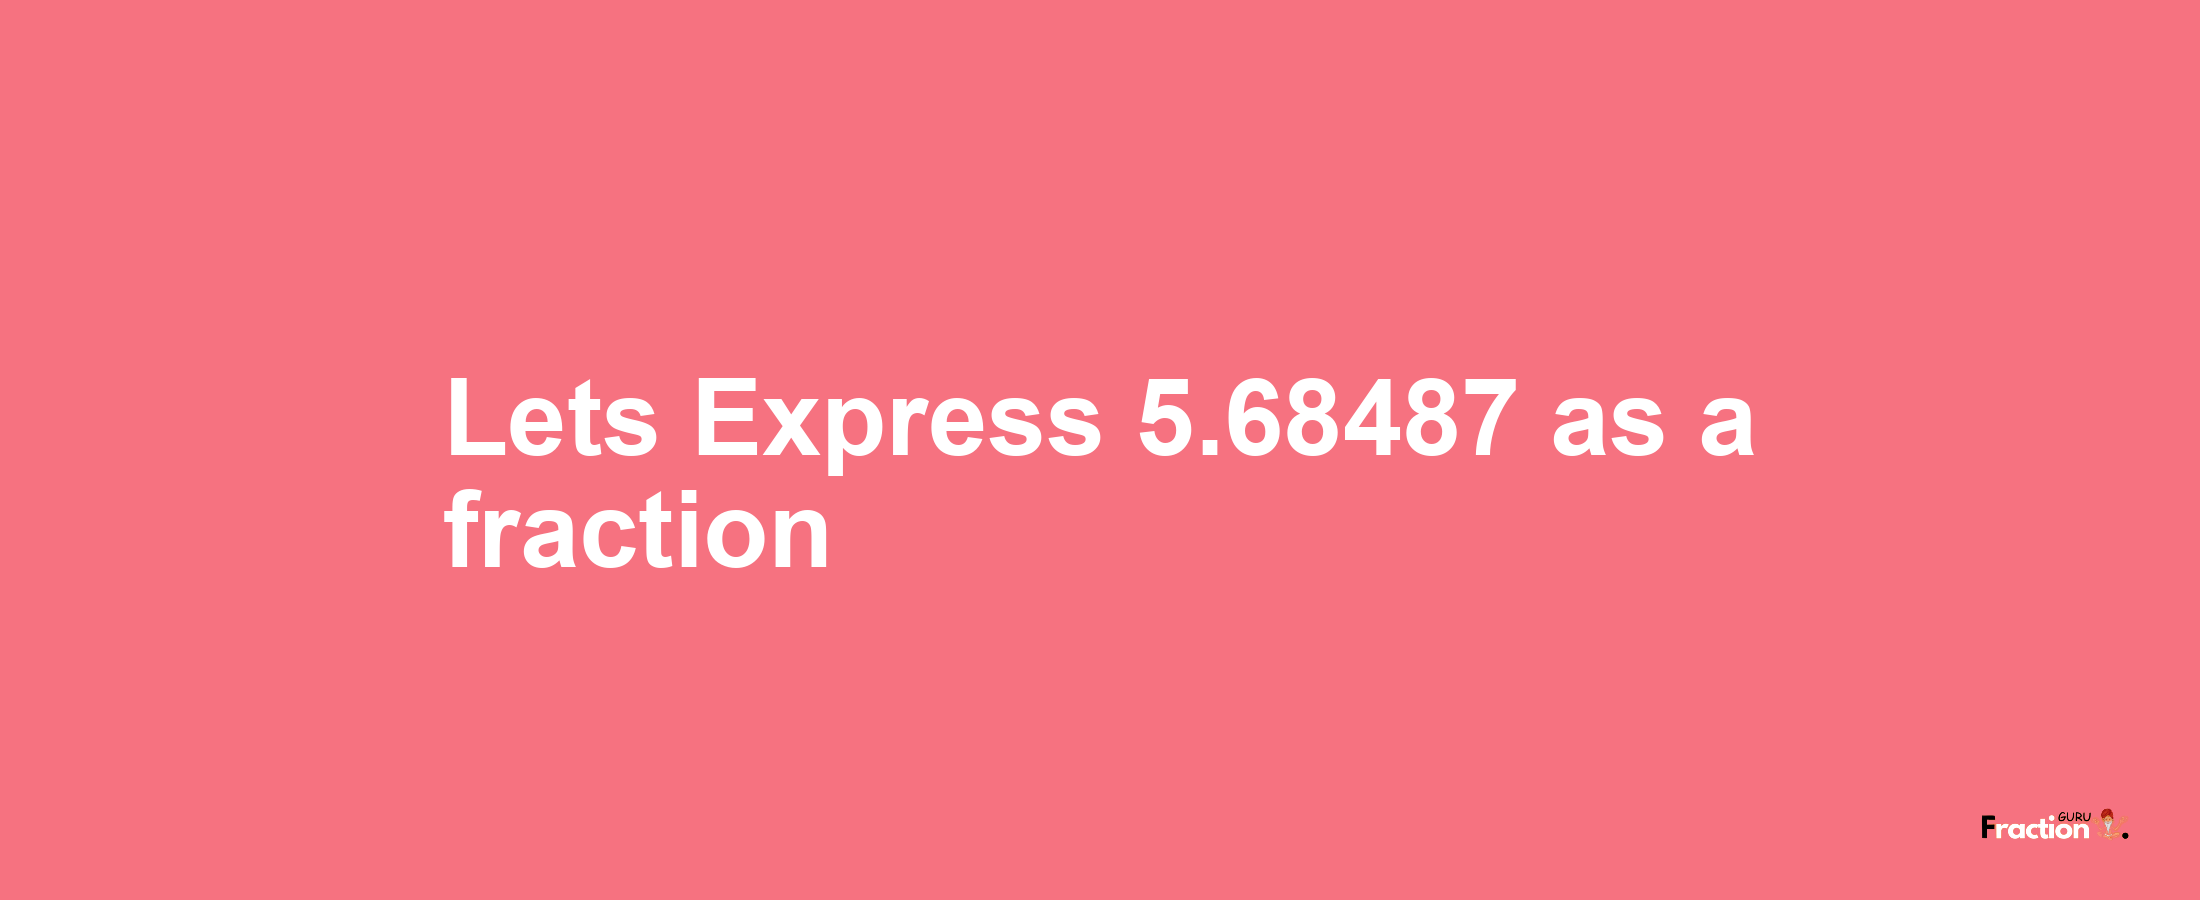 Lets Express 5.68487 as afraction